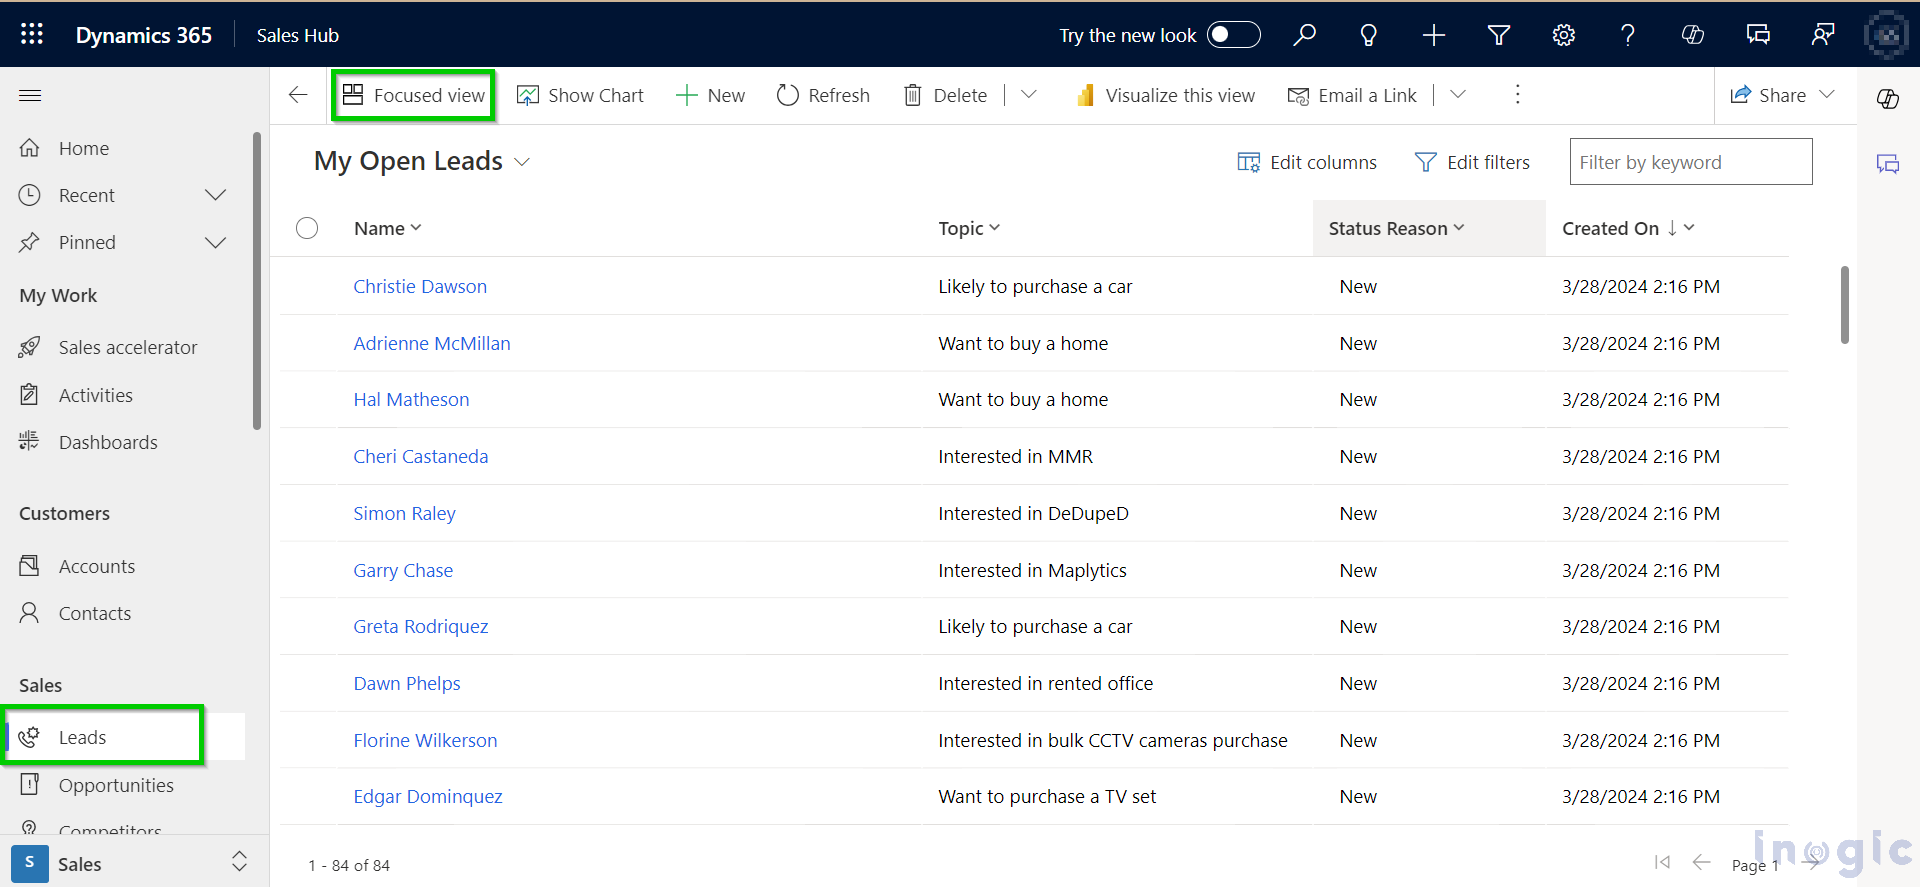 Enhancements to ‘Focused View’ and its usage within Dynamics 365